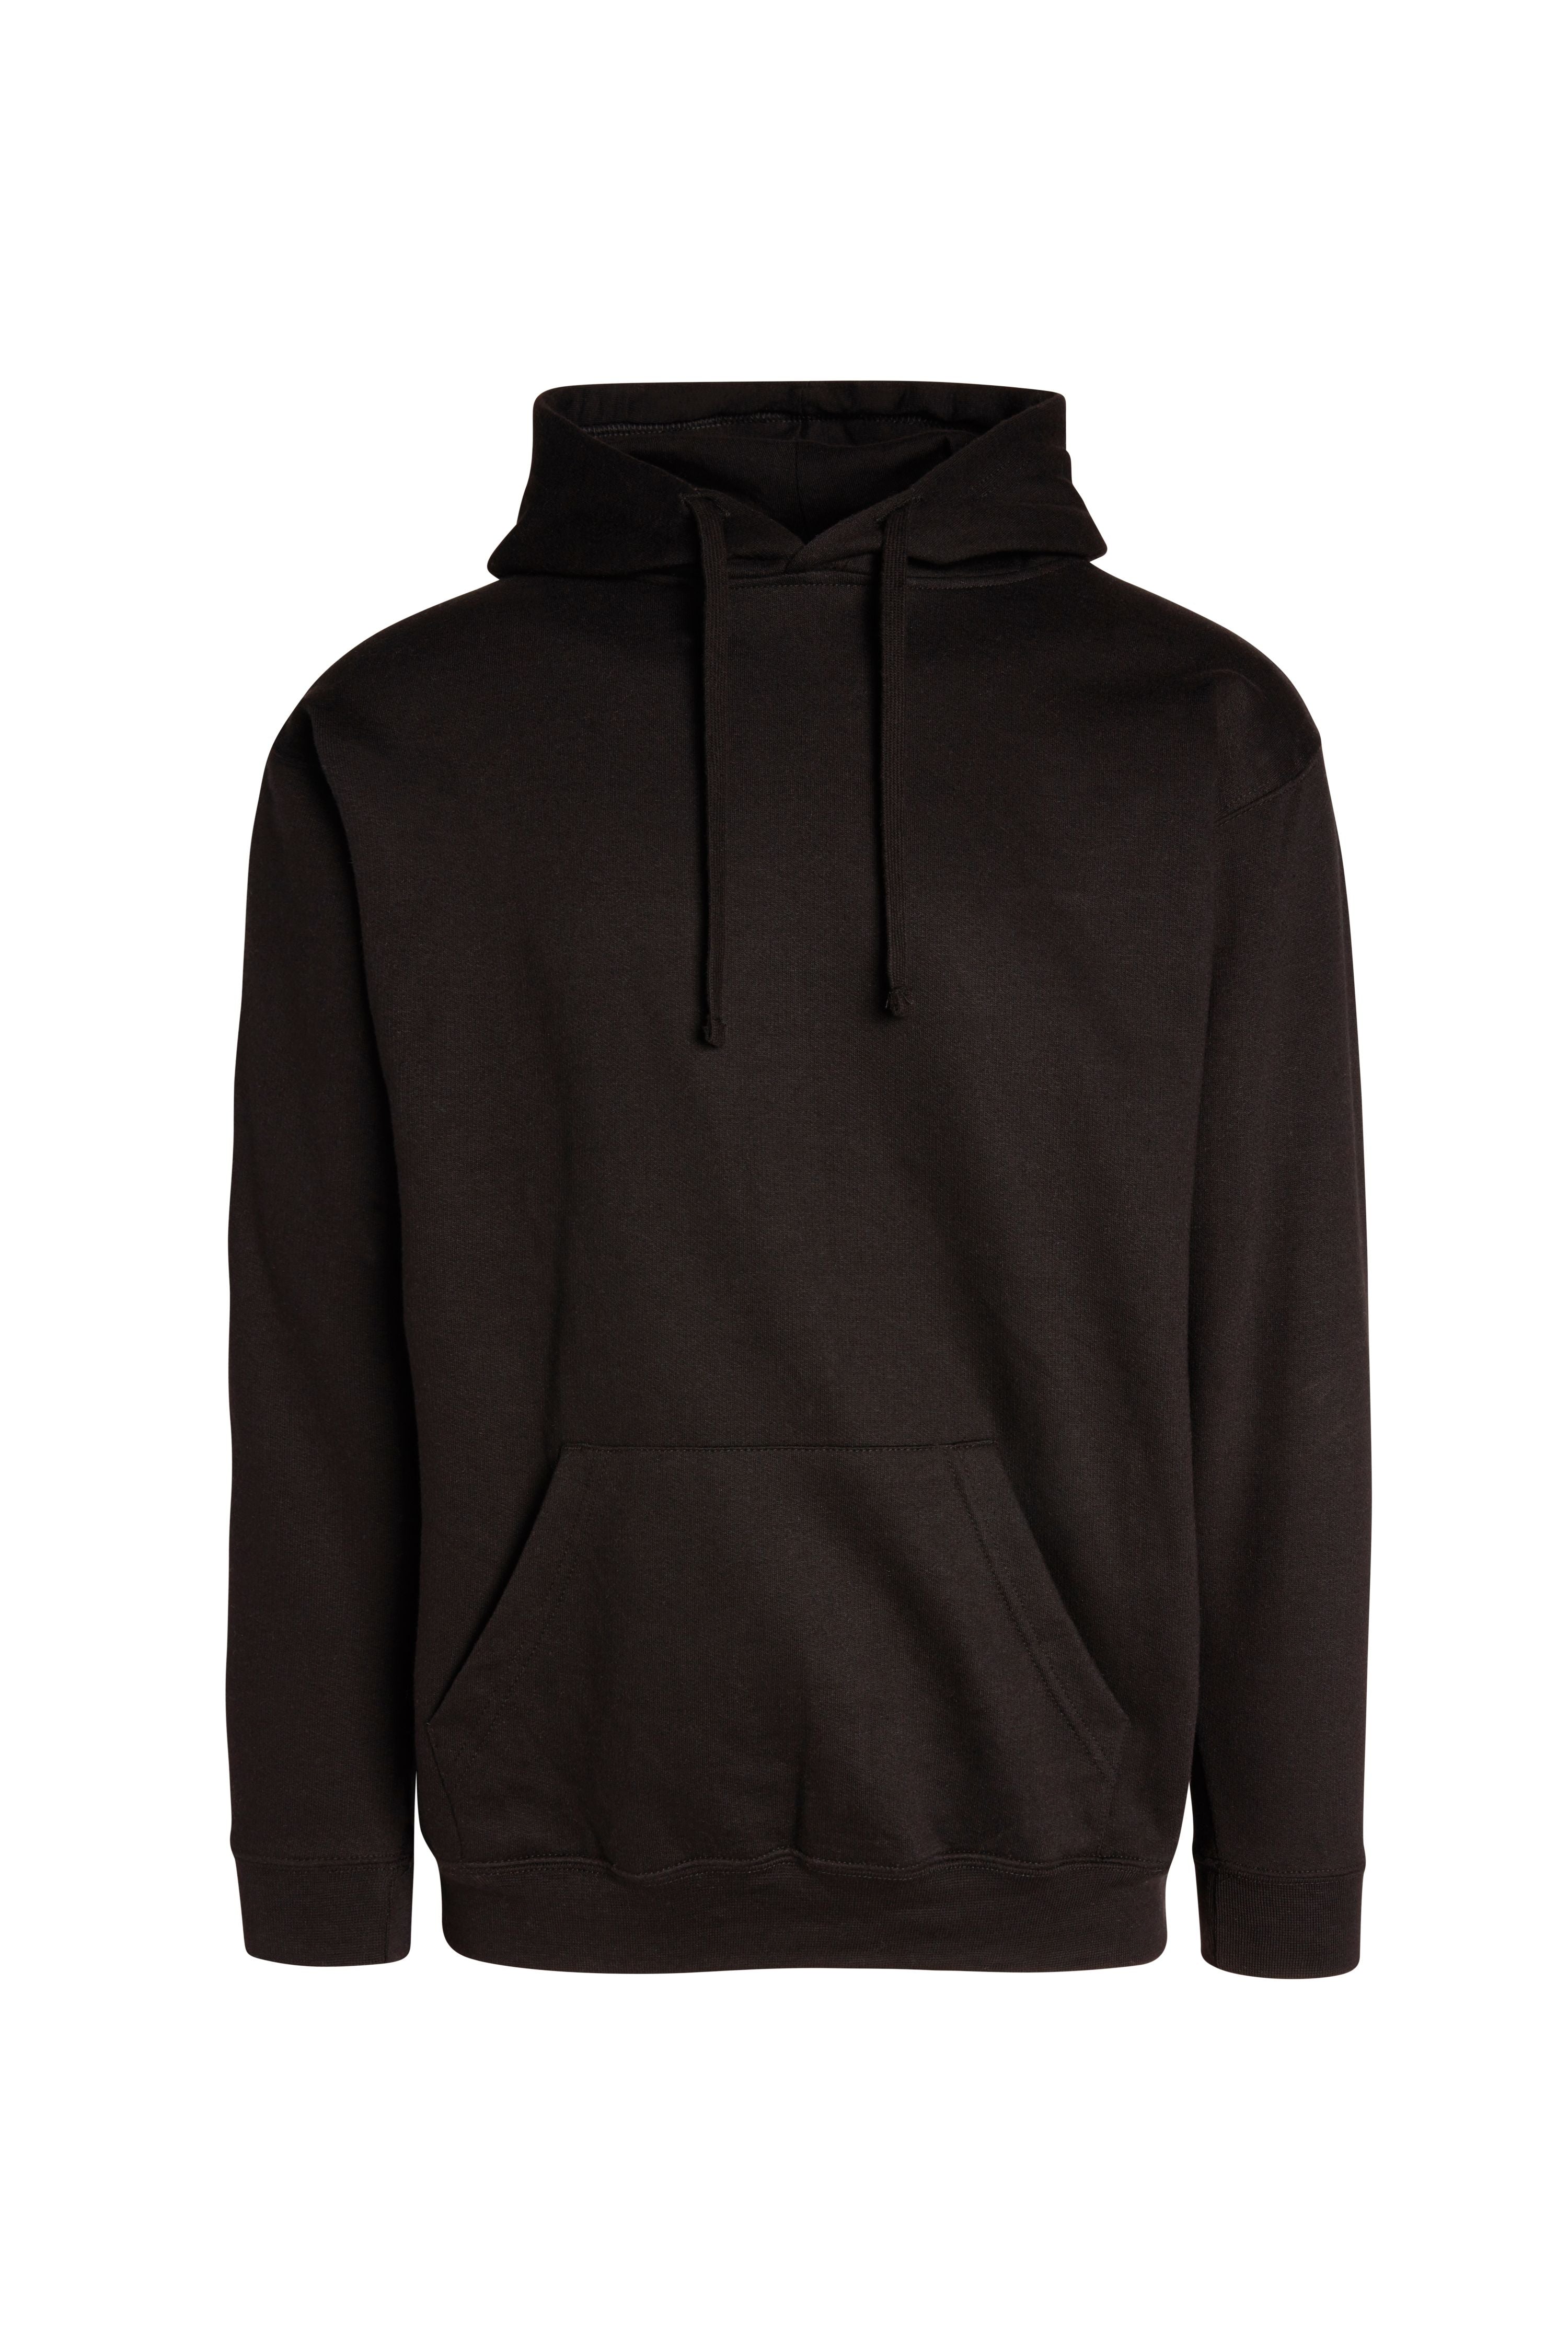 TZ5001 Promotional Pullover Hoodie | T's Tees